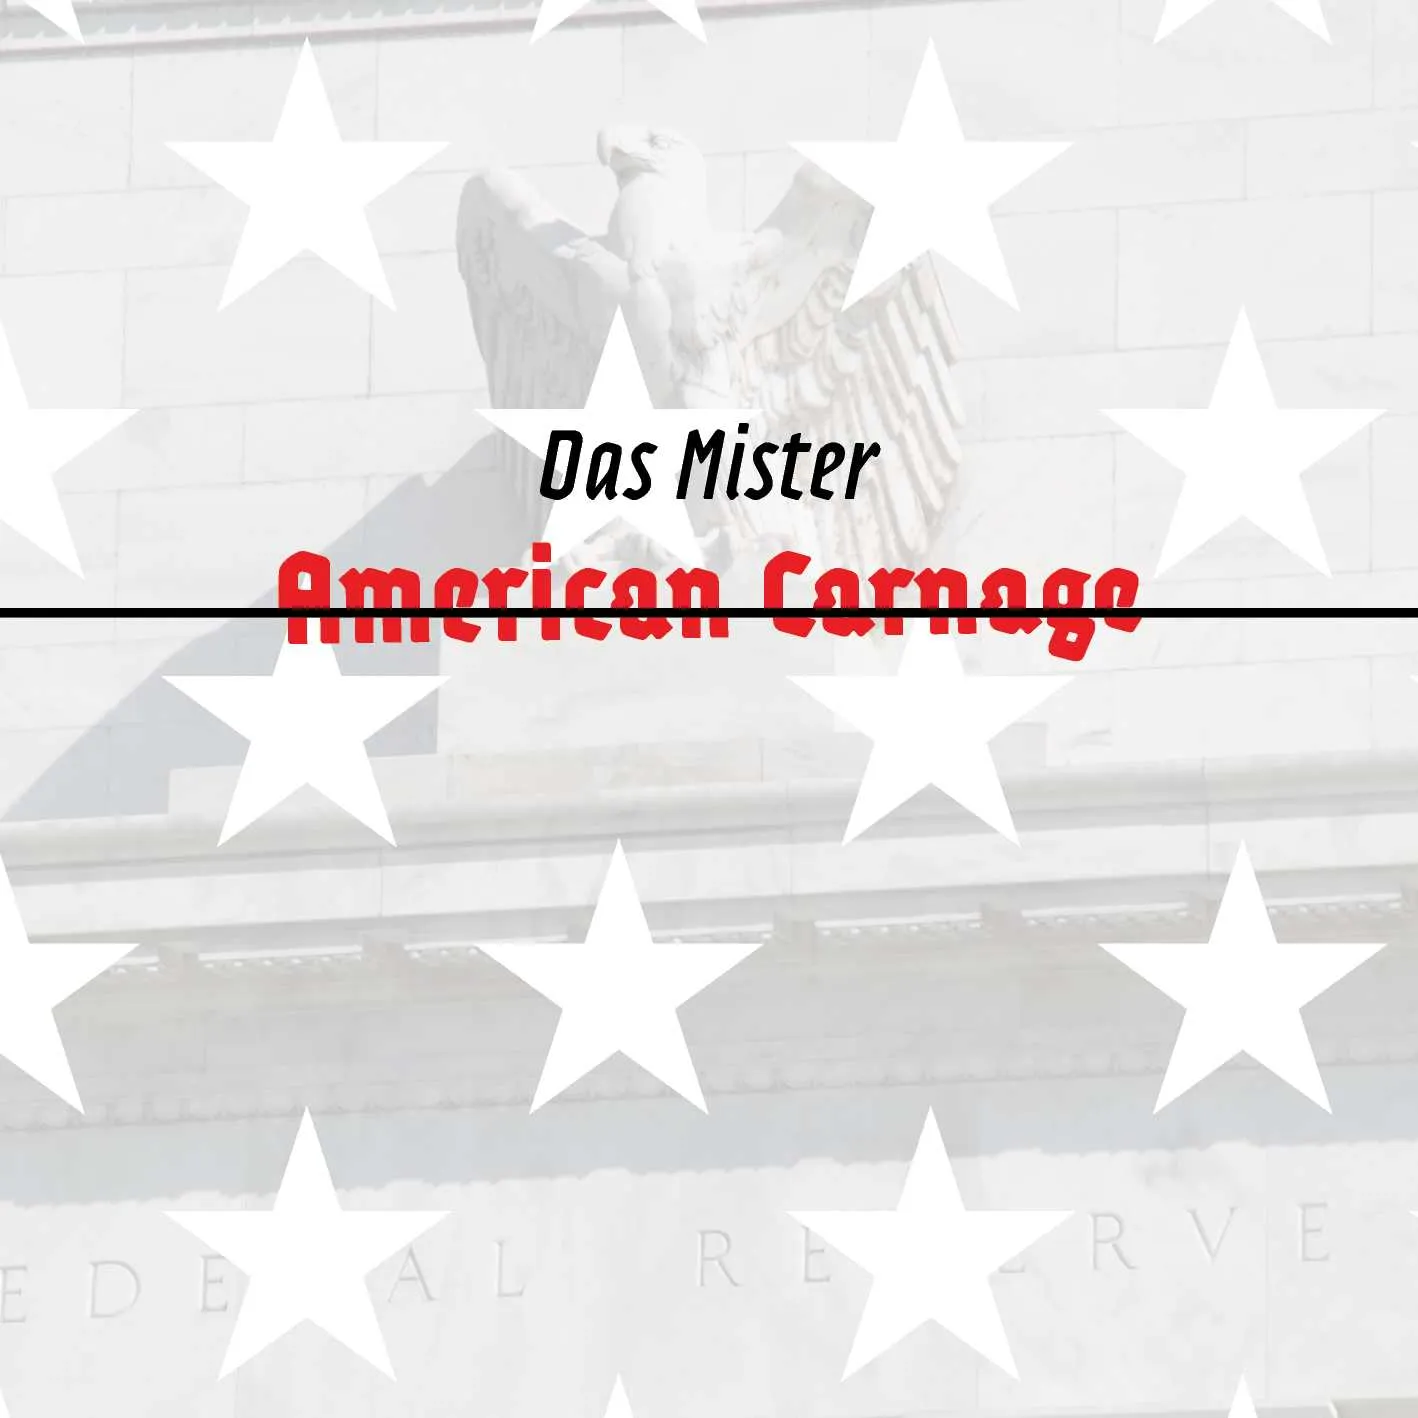 Album cover for “American Carnage” by Das Mister